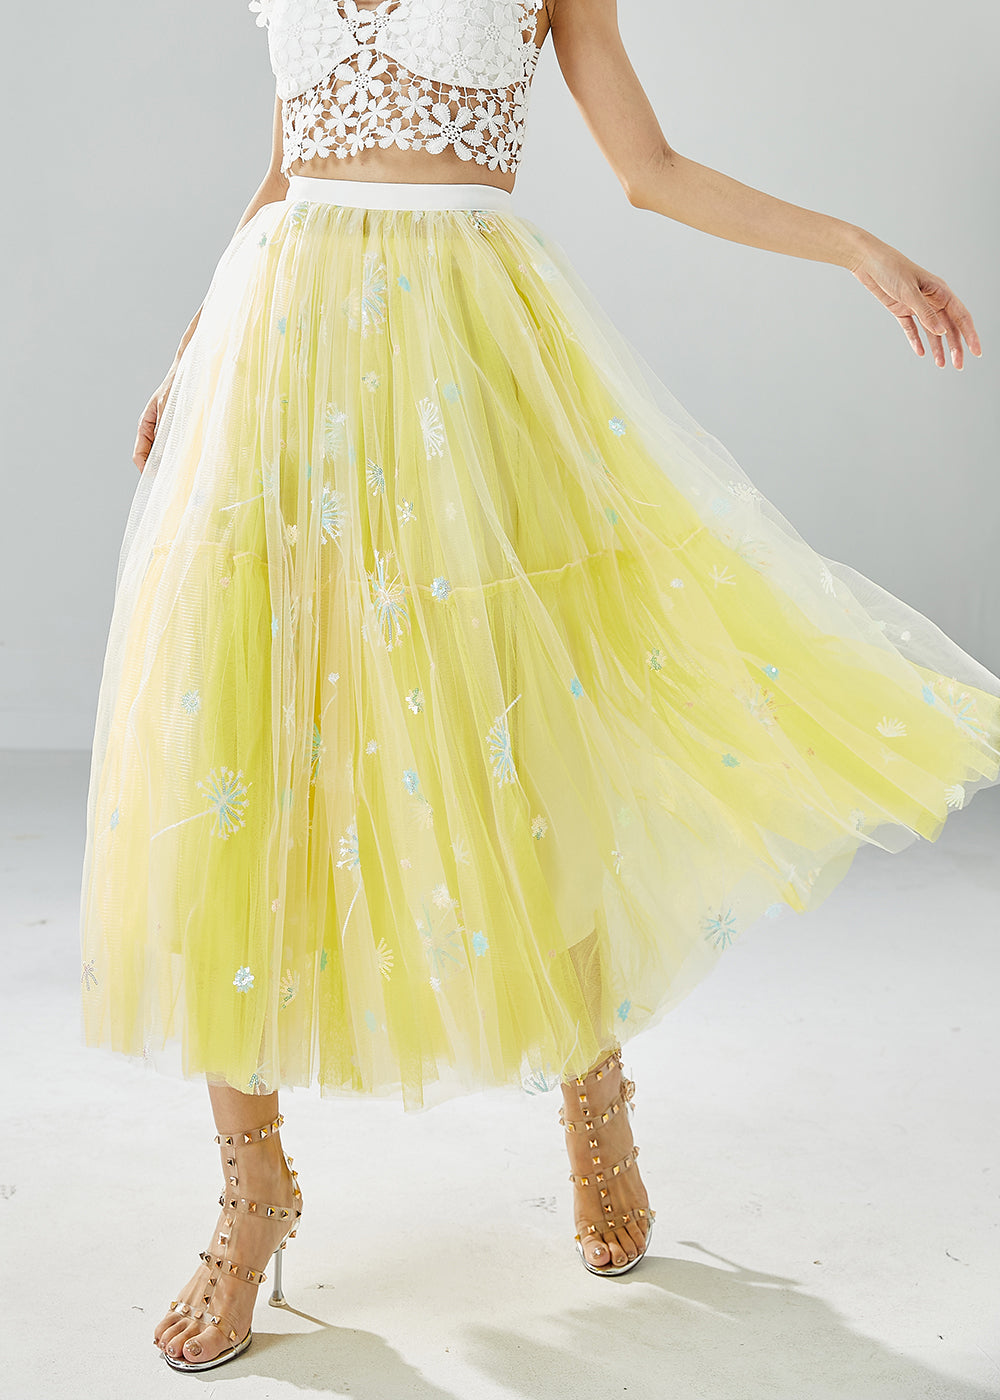 Chic Yellow Dandelion Embroideried Wear On Both Sides Tulle Skirts Summer